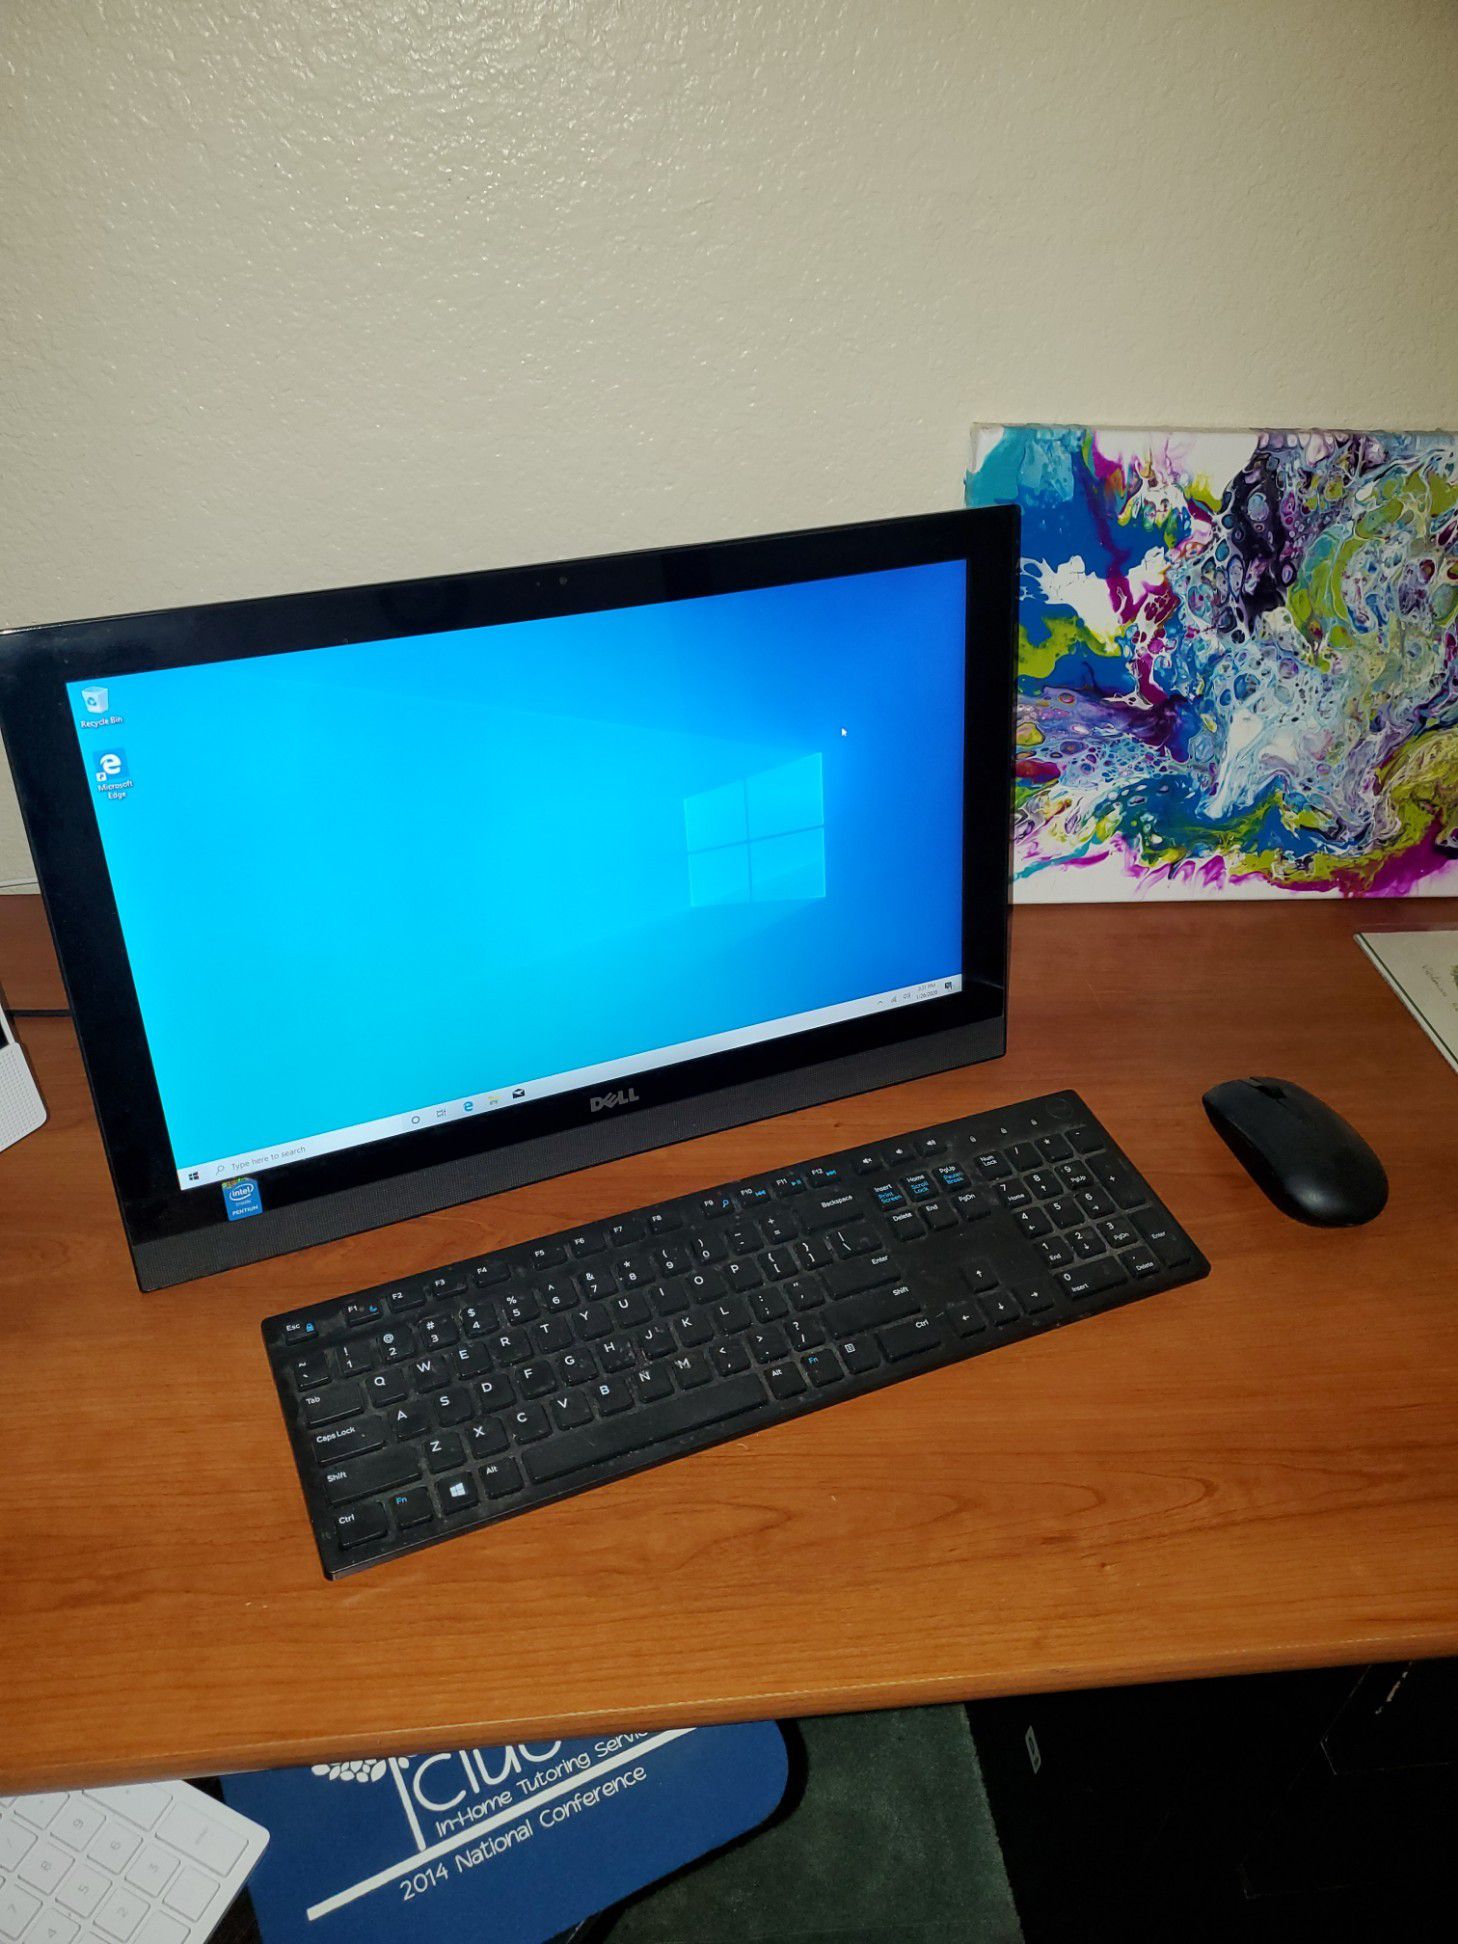 Dell Inspiron 3043 All-in-One